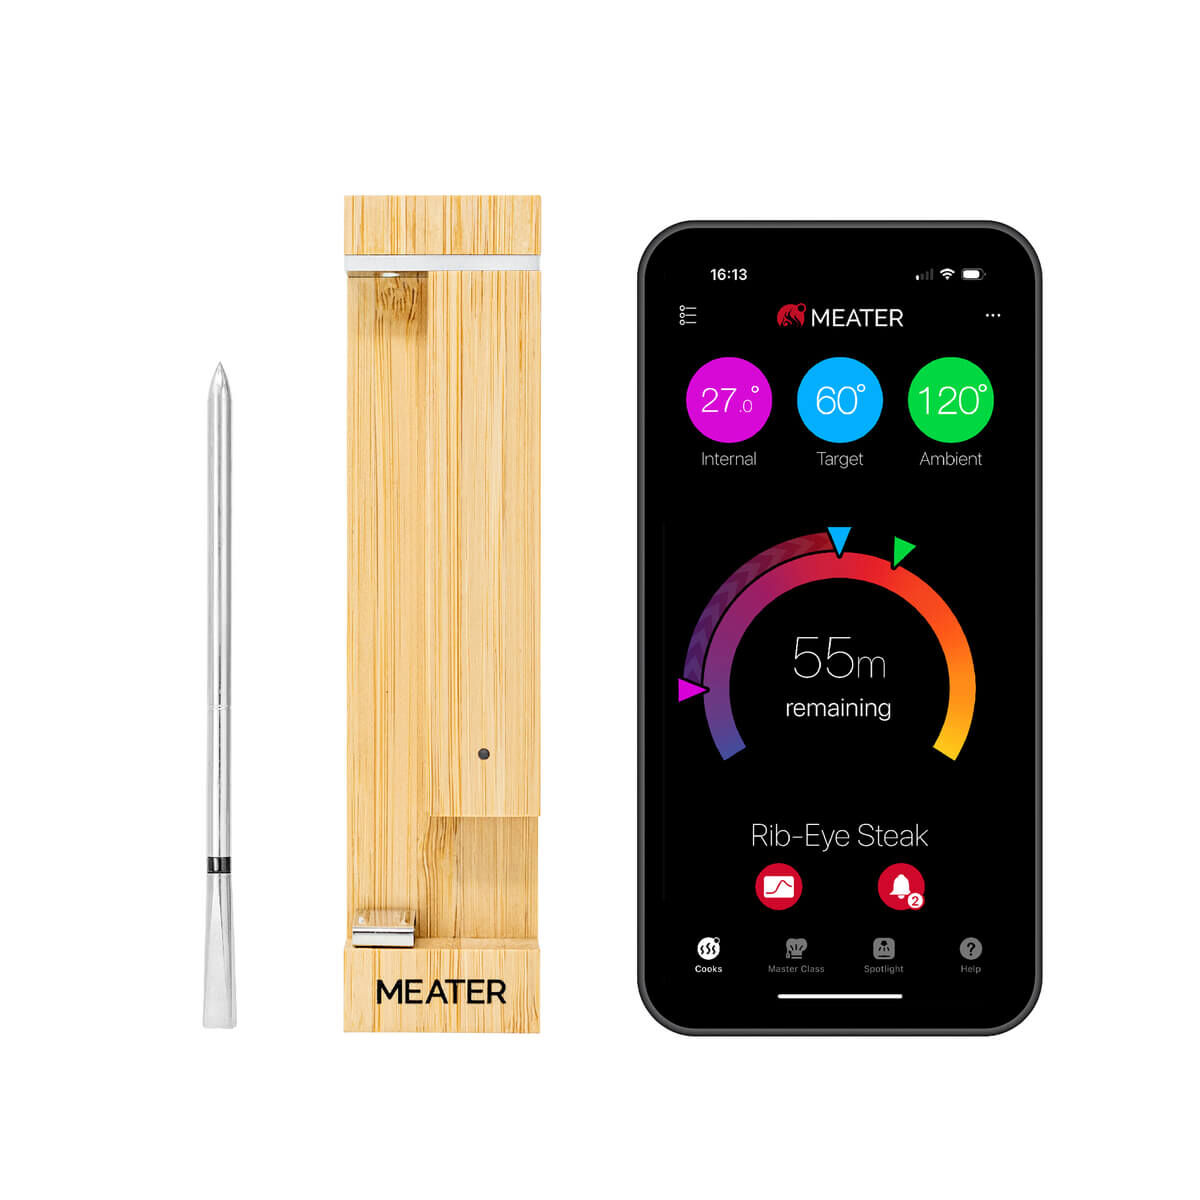 MEATER 2 Plus smartes Grillthermometer und Smartphone mit Meater App